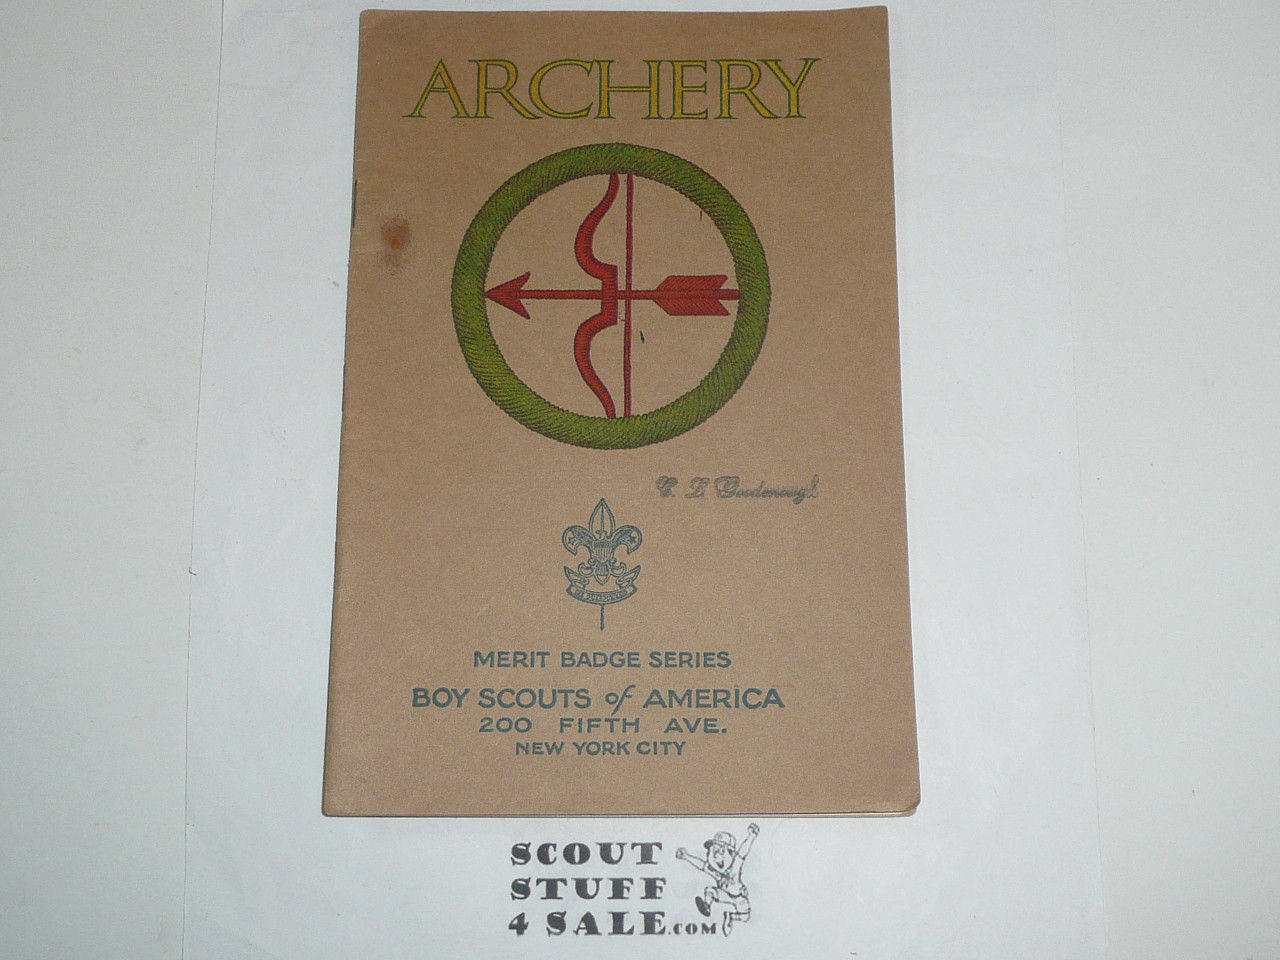 Archery Merit Badge Pamphlet, Type 3, Tan Cover, 1925 Printing, Mint condition